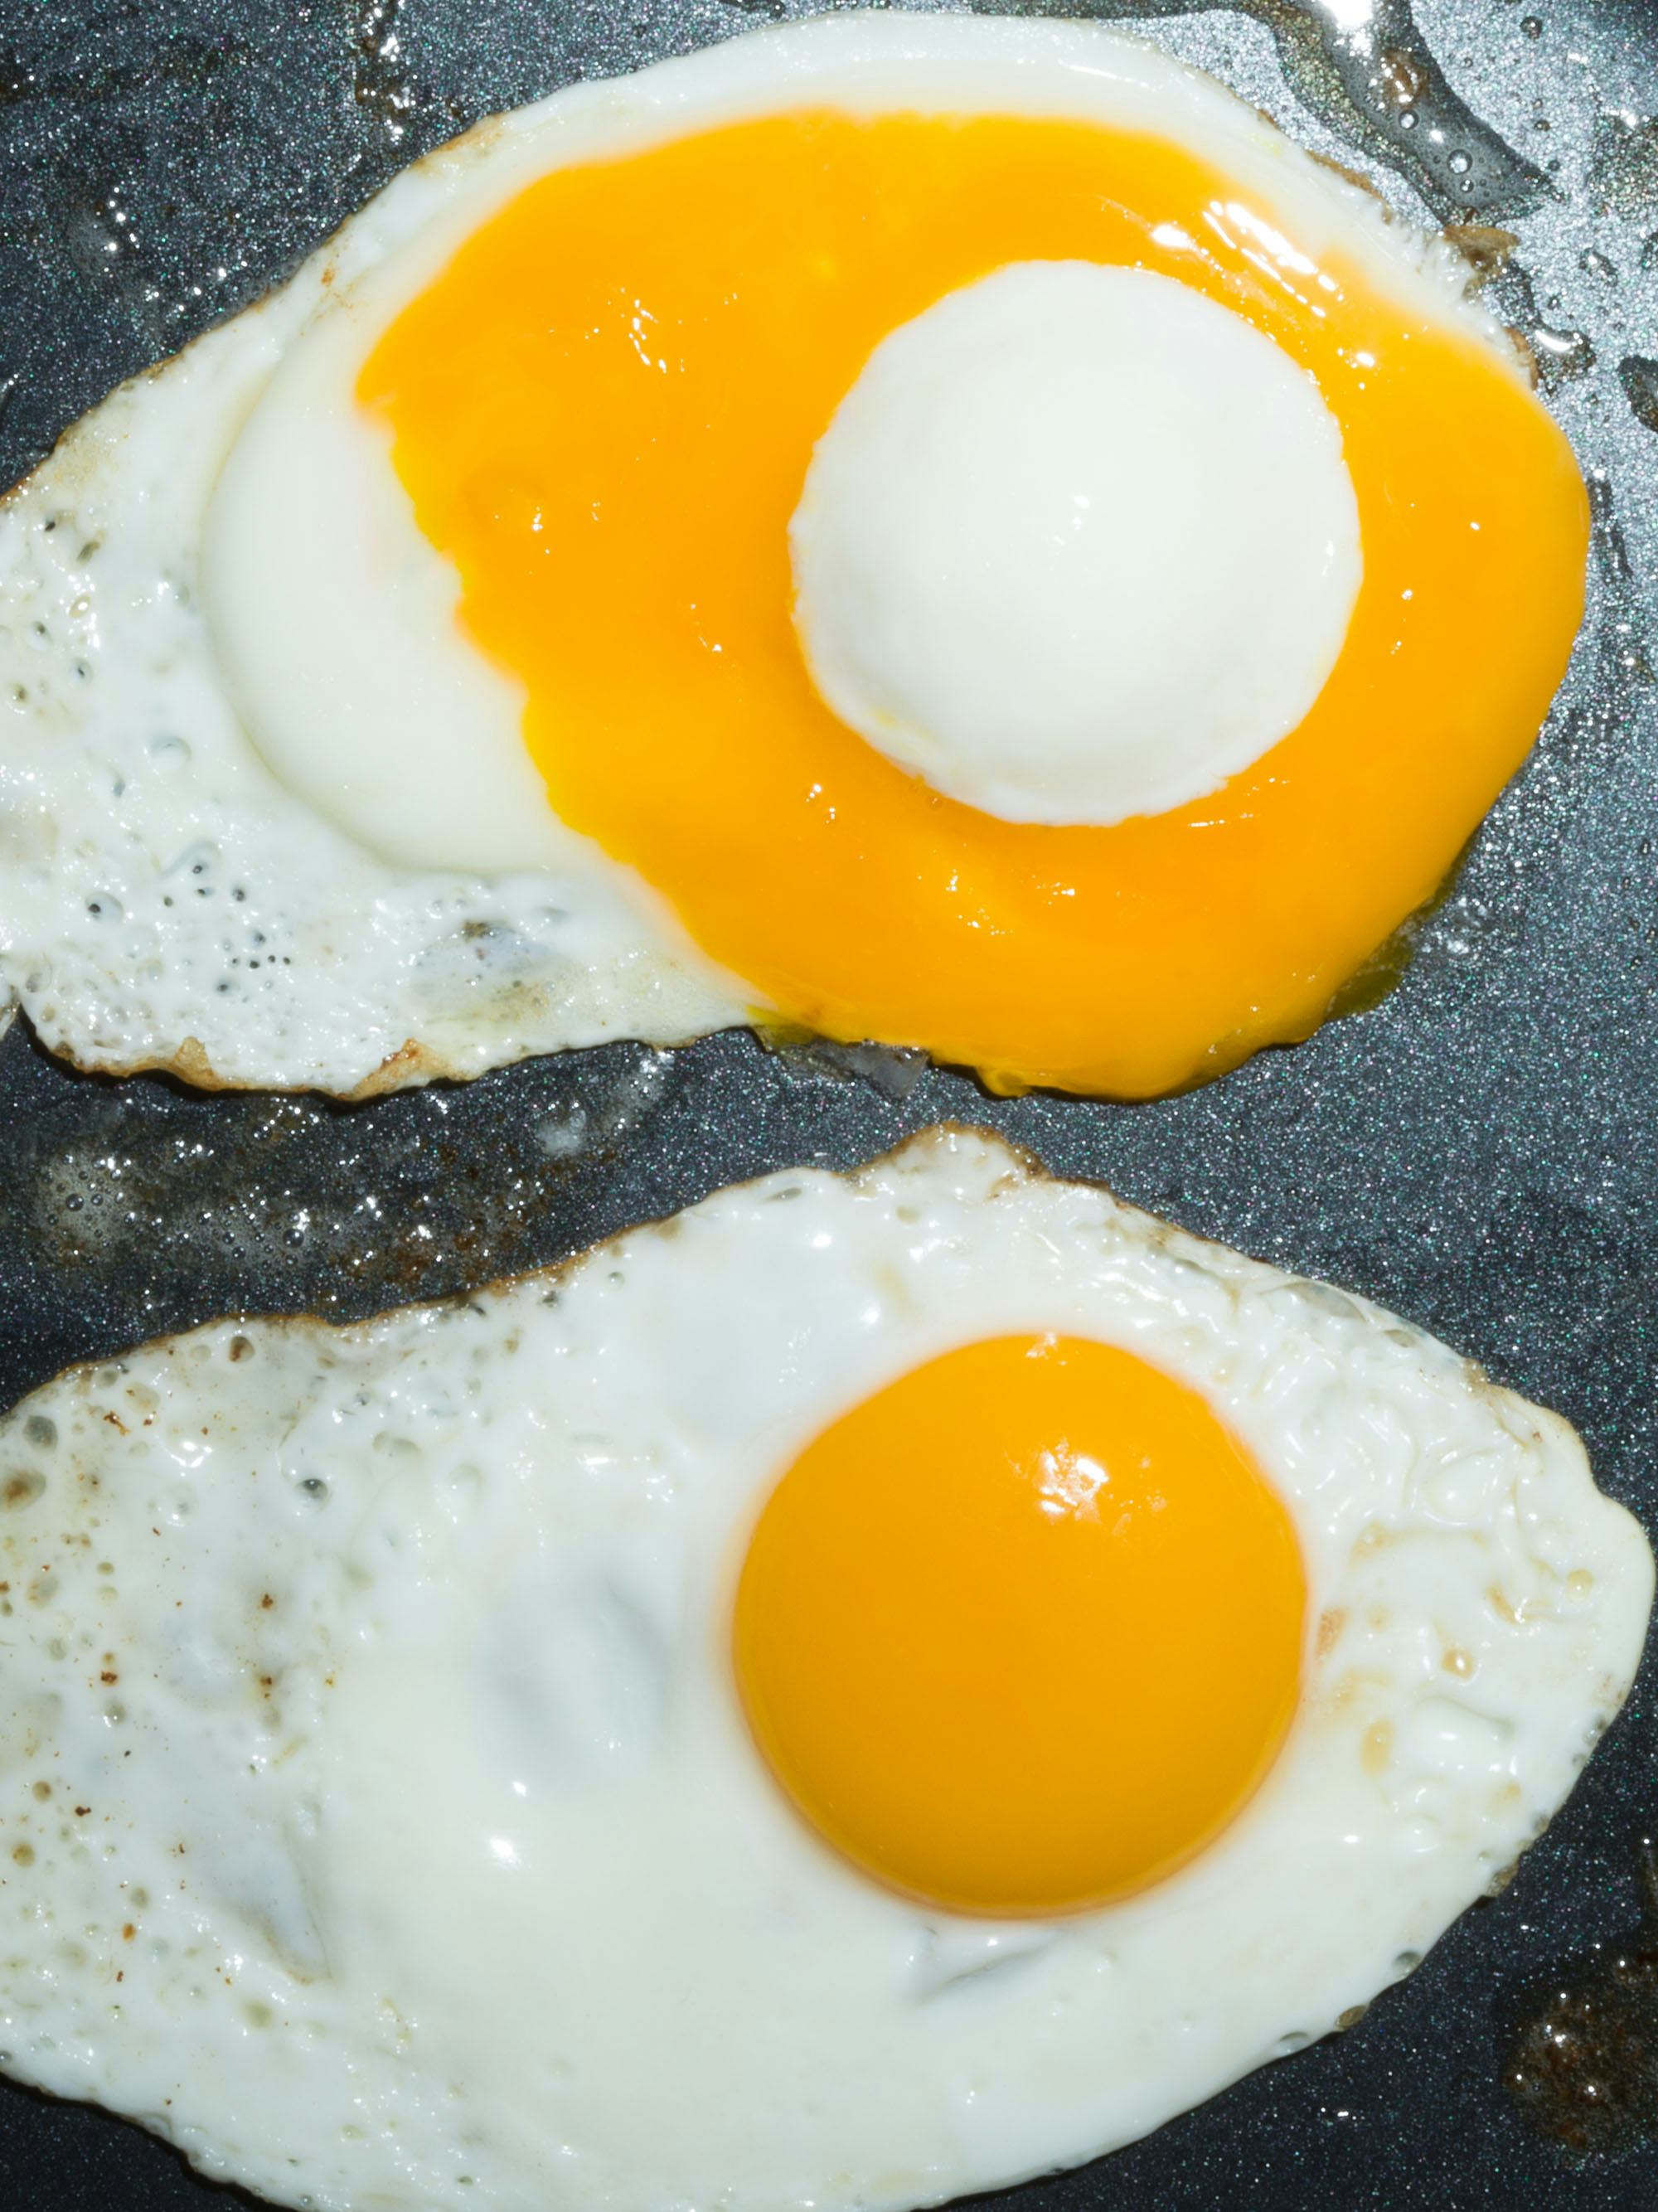 Close-up image of two eggs, with inverted yellow and white yolk © Andrea Orejarena & Caleb Stein